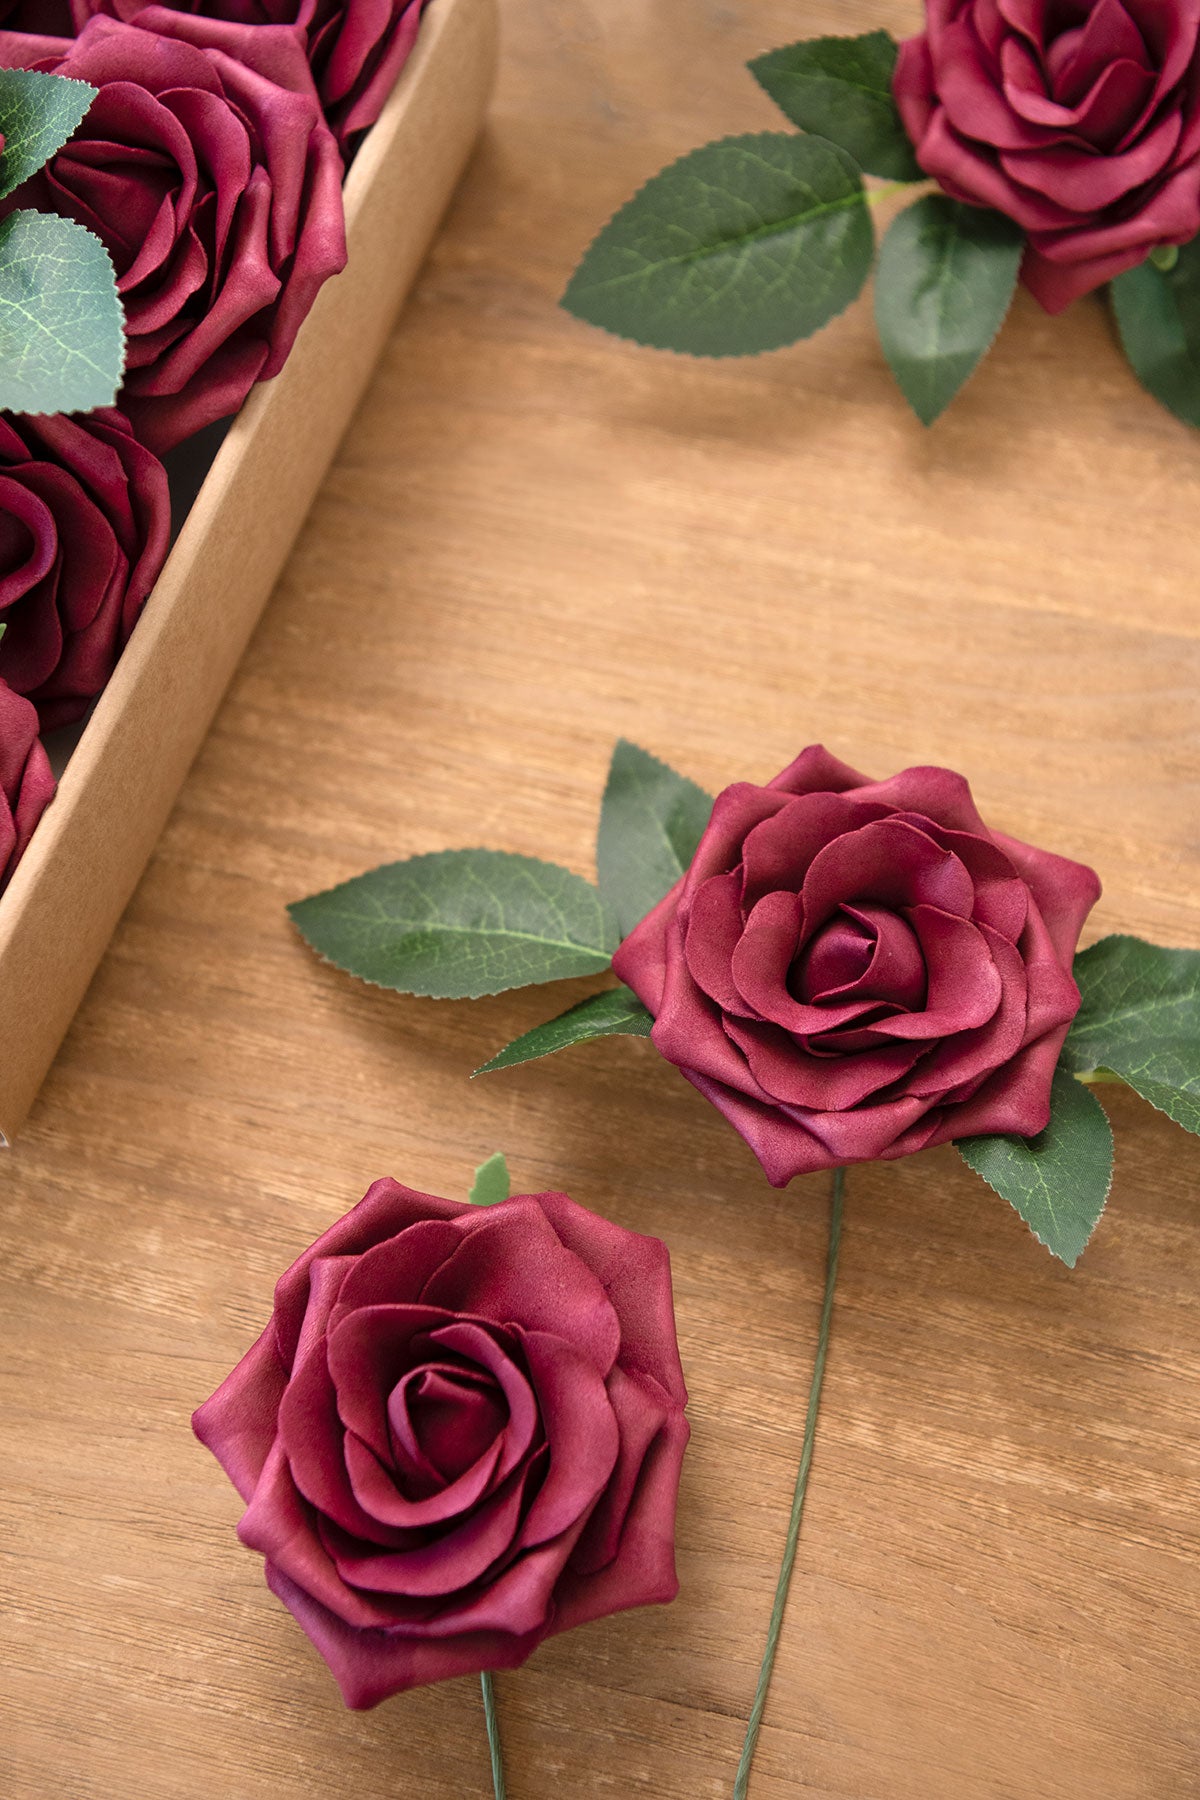 3.5" Foam Avalanche Rose with Stem on Sale